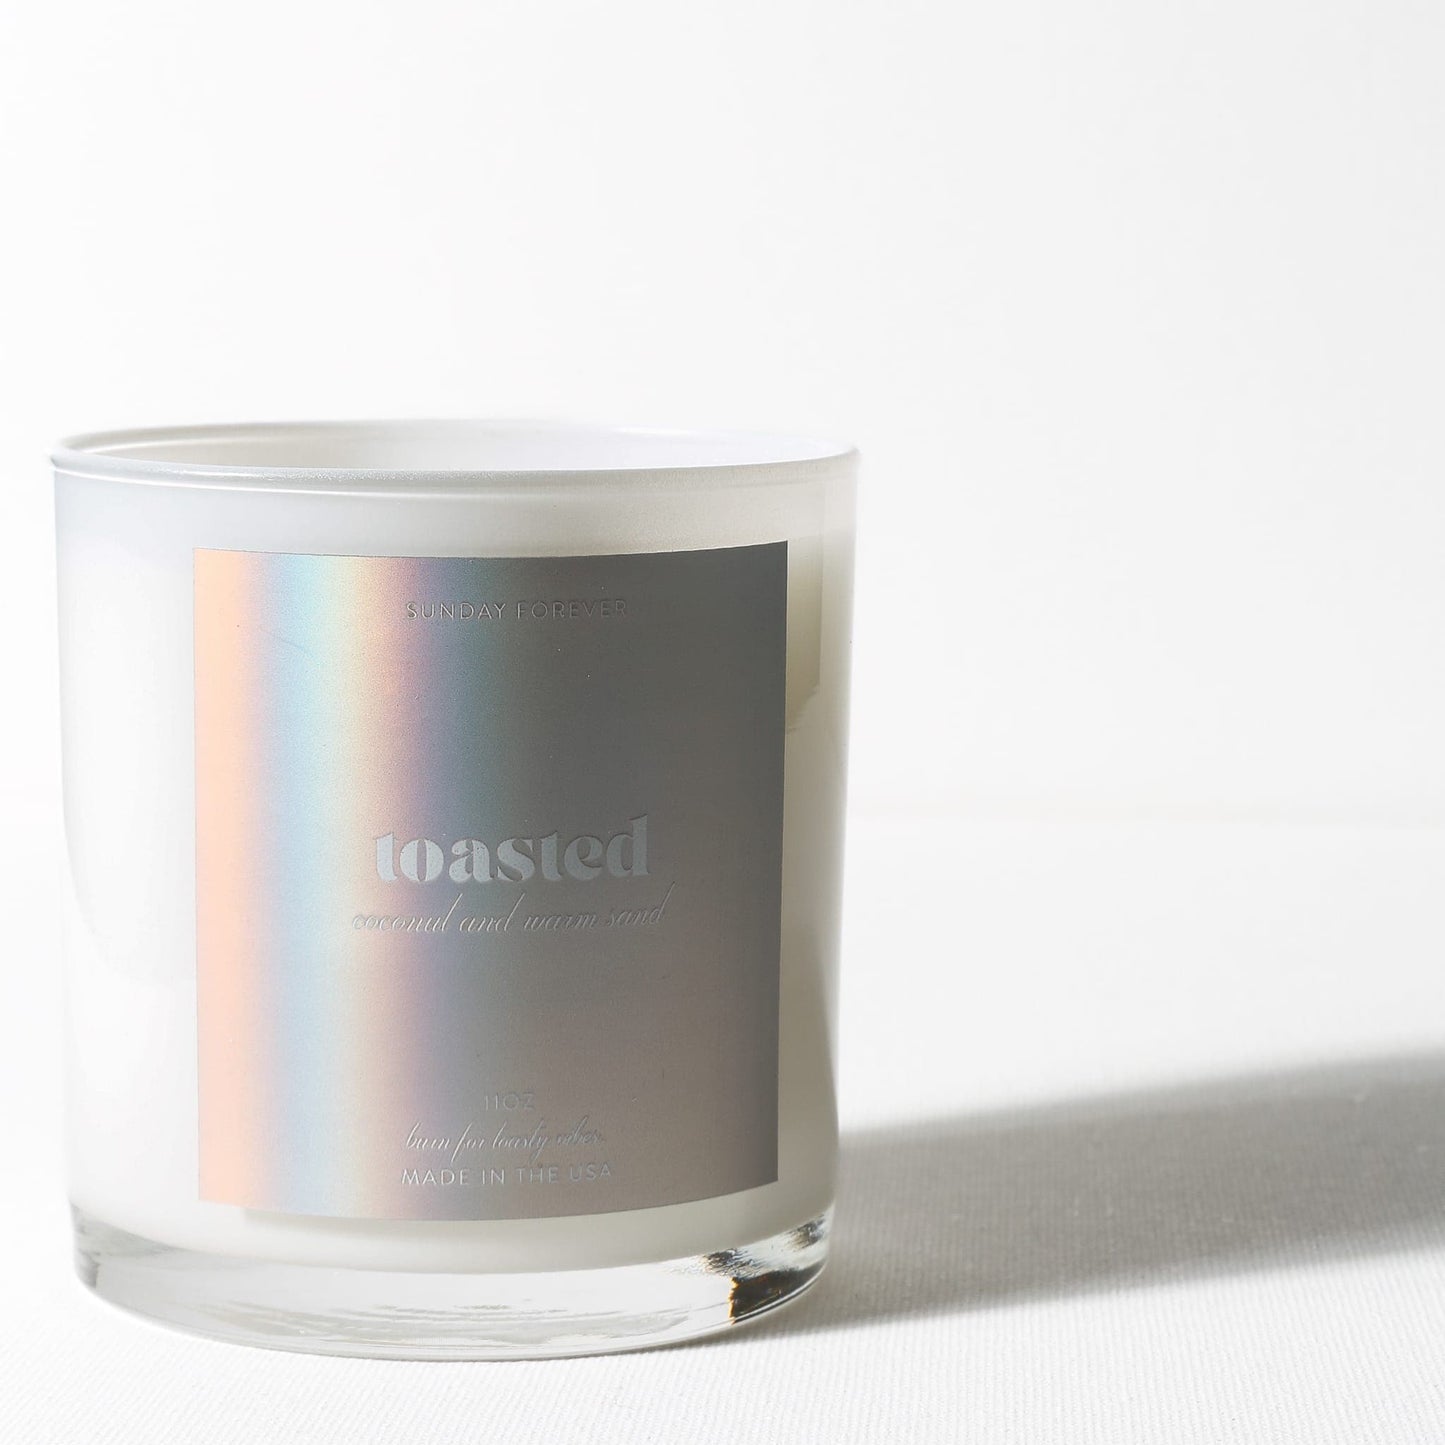 Sunday Forever Candles Toasted Luxury Candle with Coconut and Warm Sand